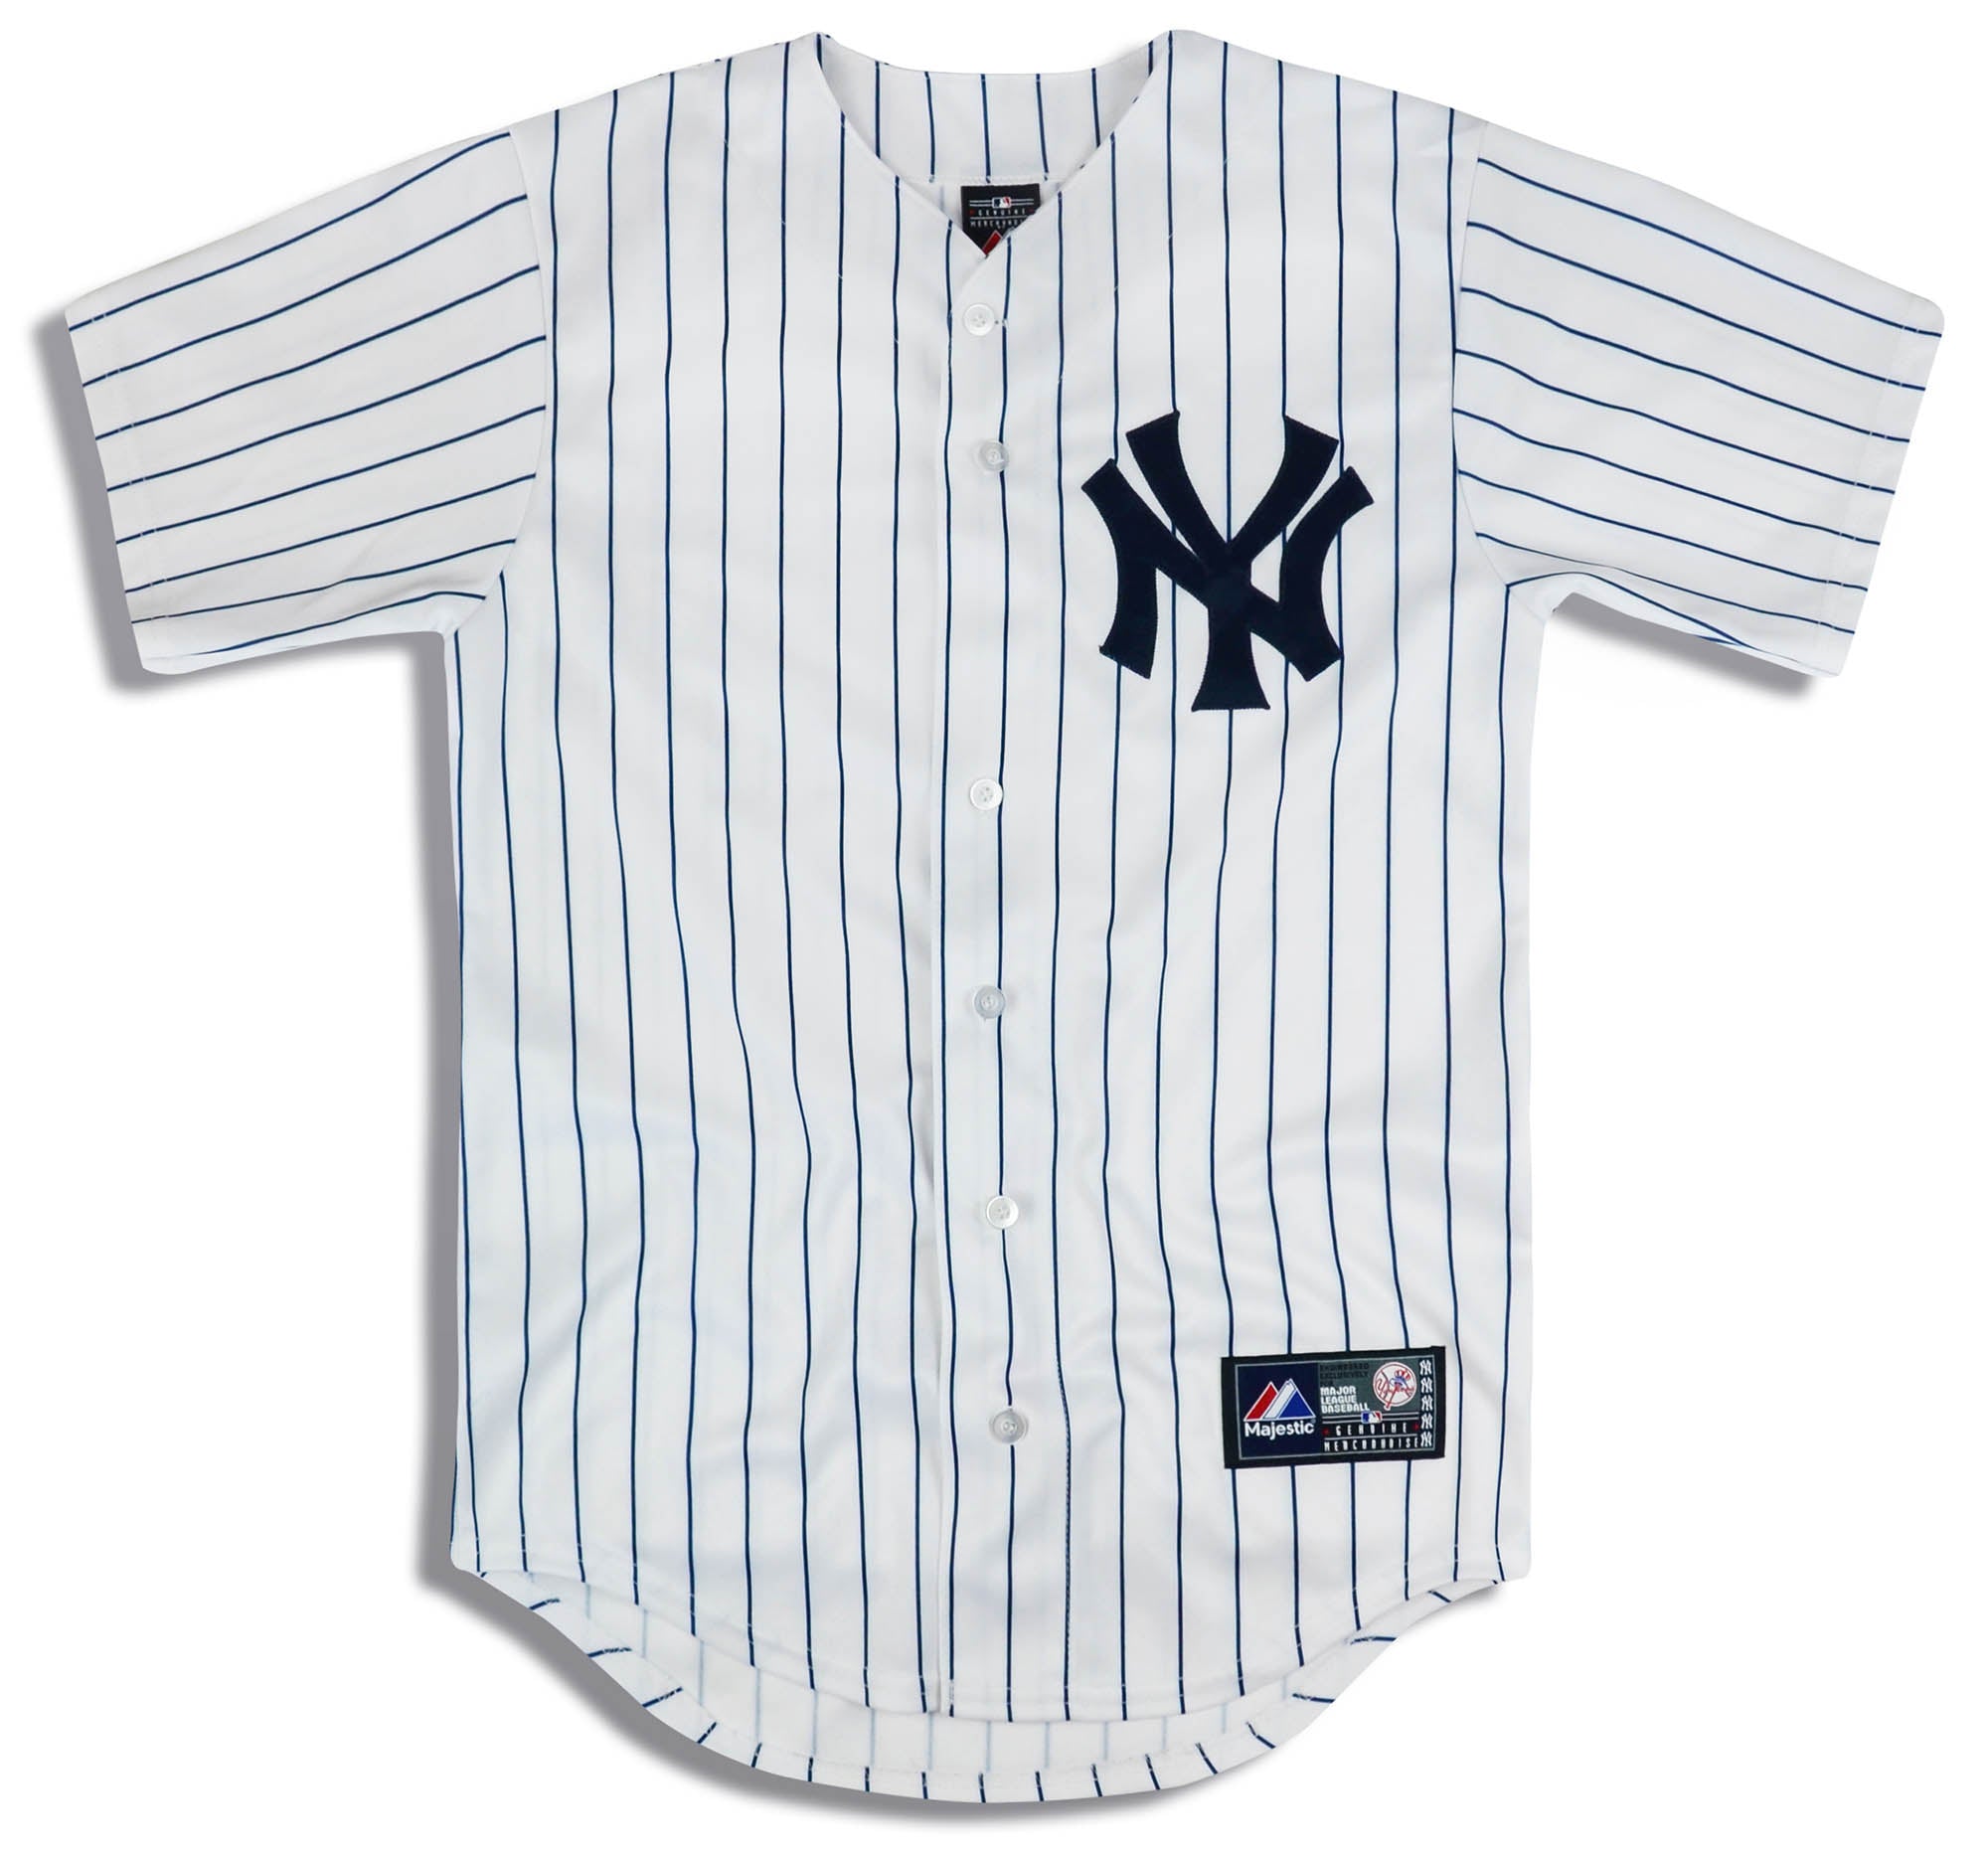 2010-16 NEW YORK YANKEES MAJESTIC JERSEY (HOME) XL - Classic